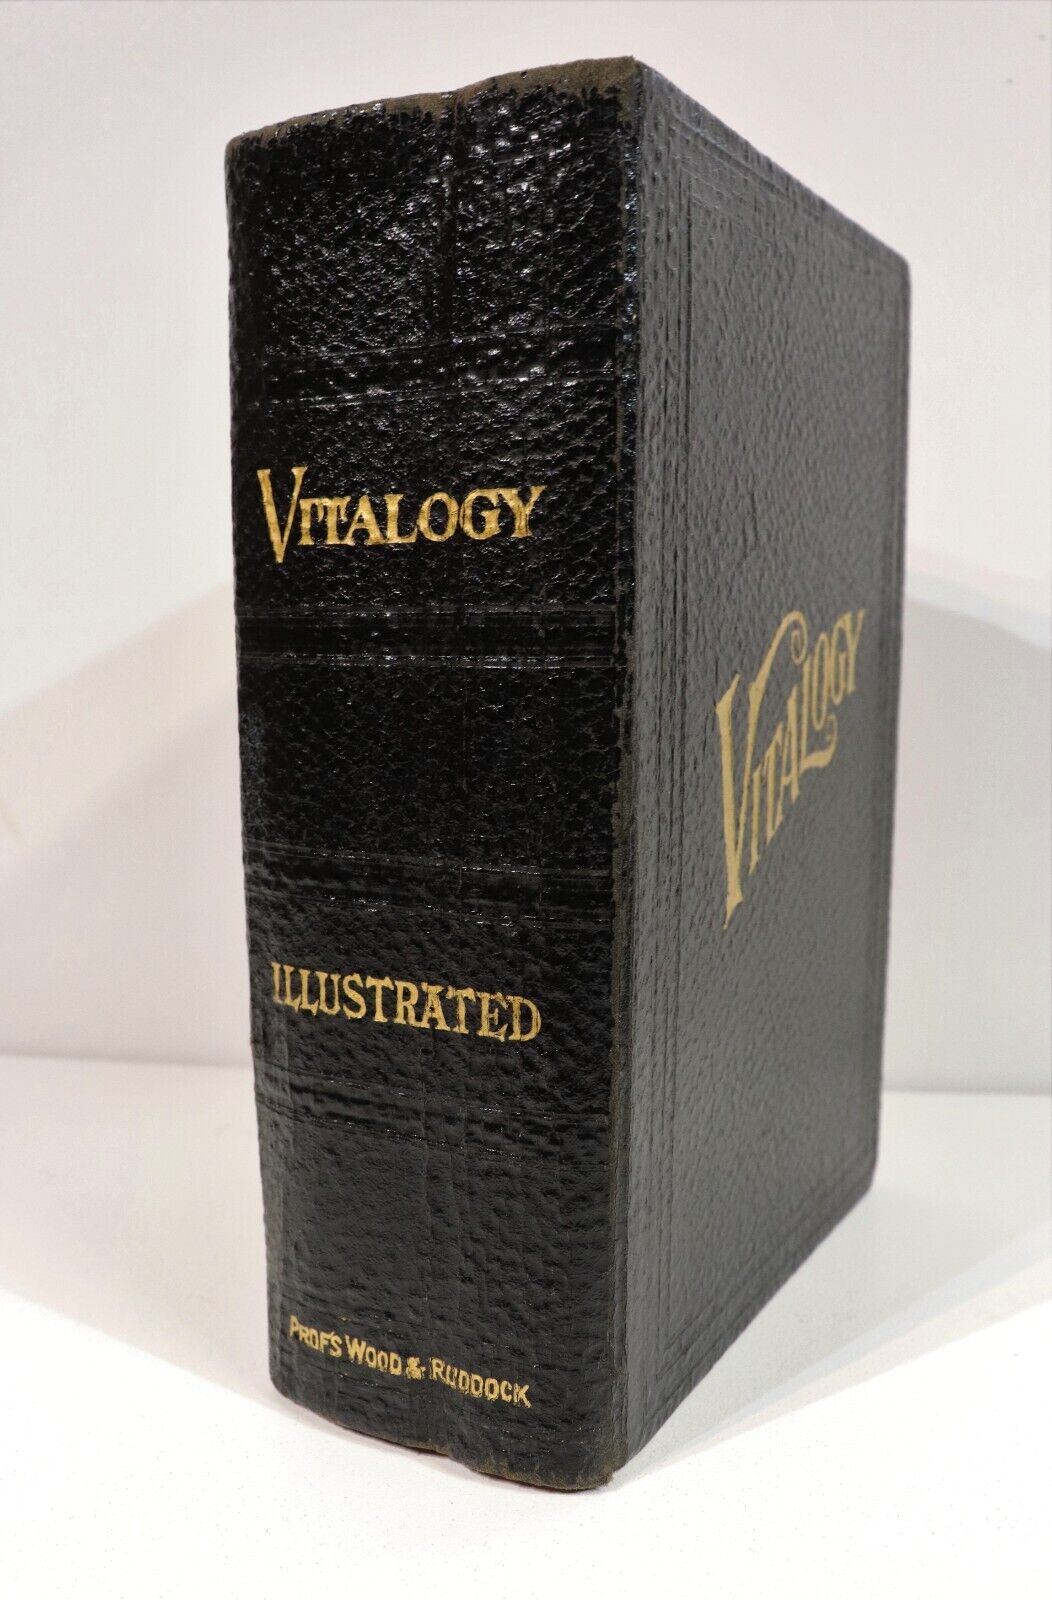 Vitalogy: Encyclopedia Of Health & Home - 1935 - Antique Medical Reference Book - 0